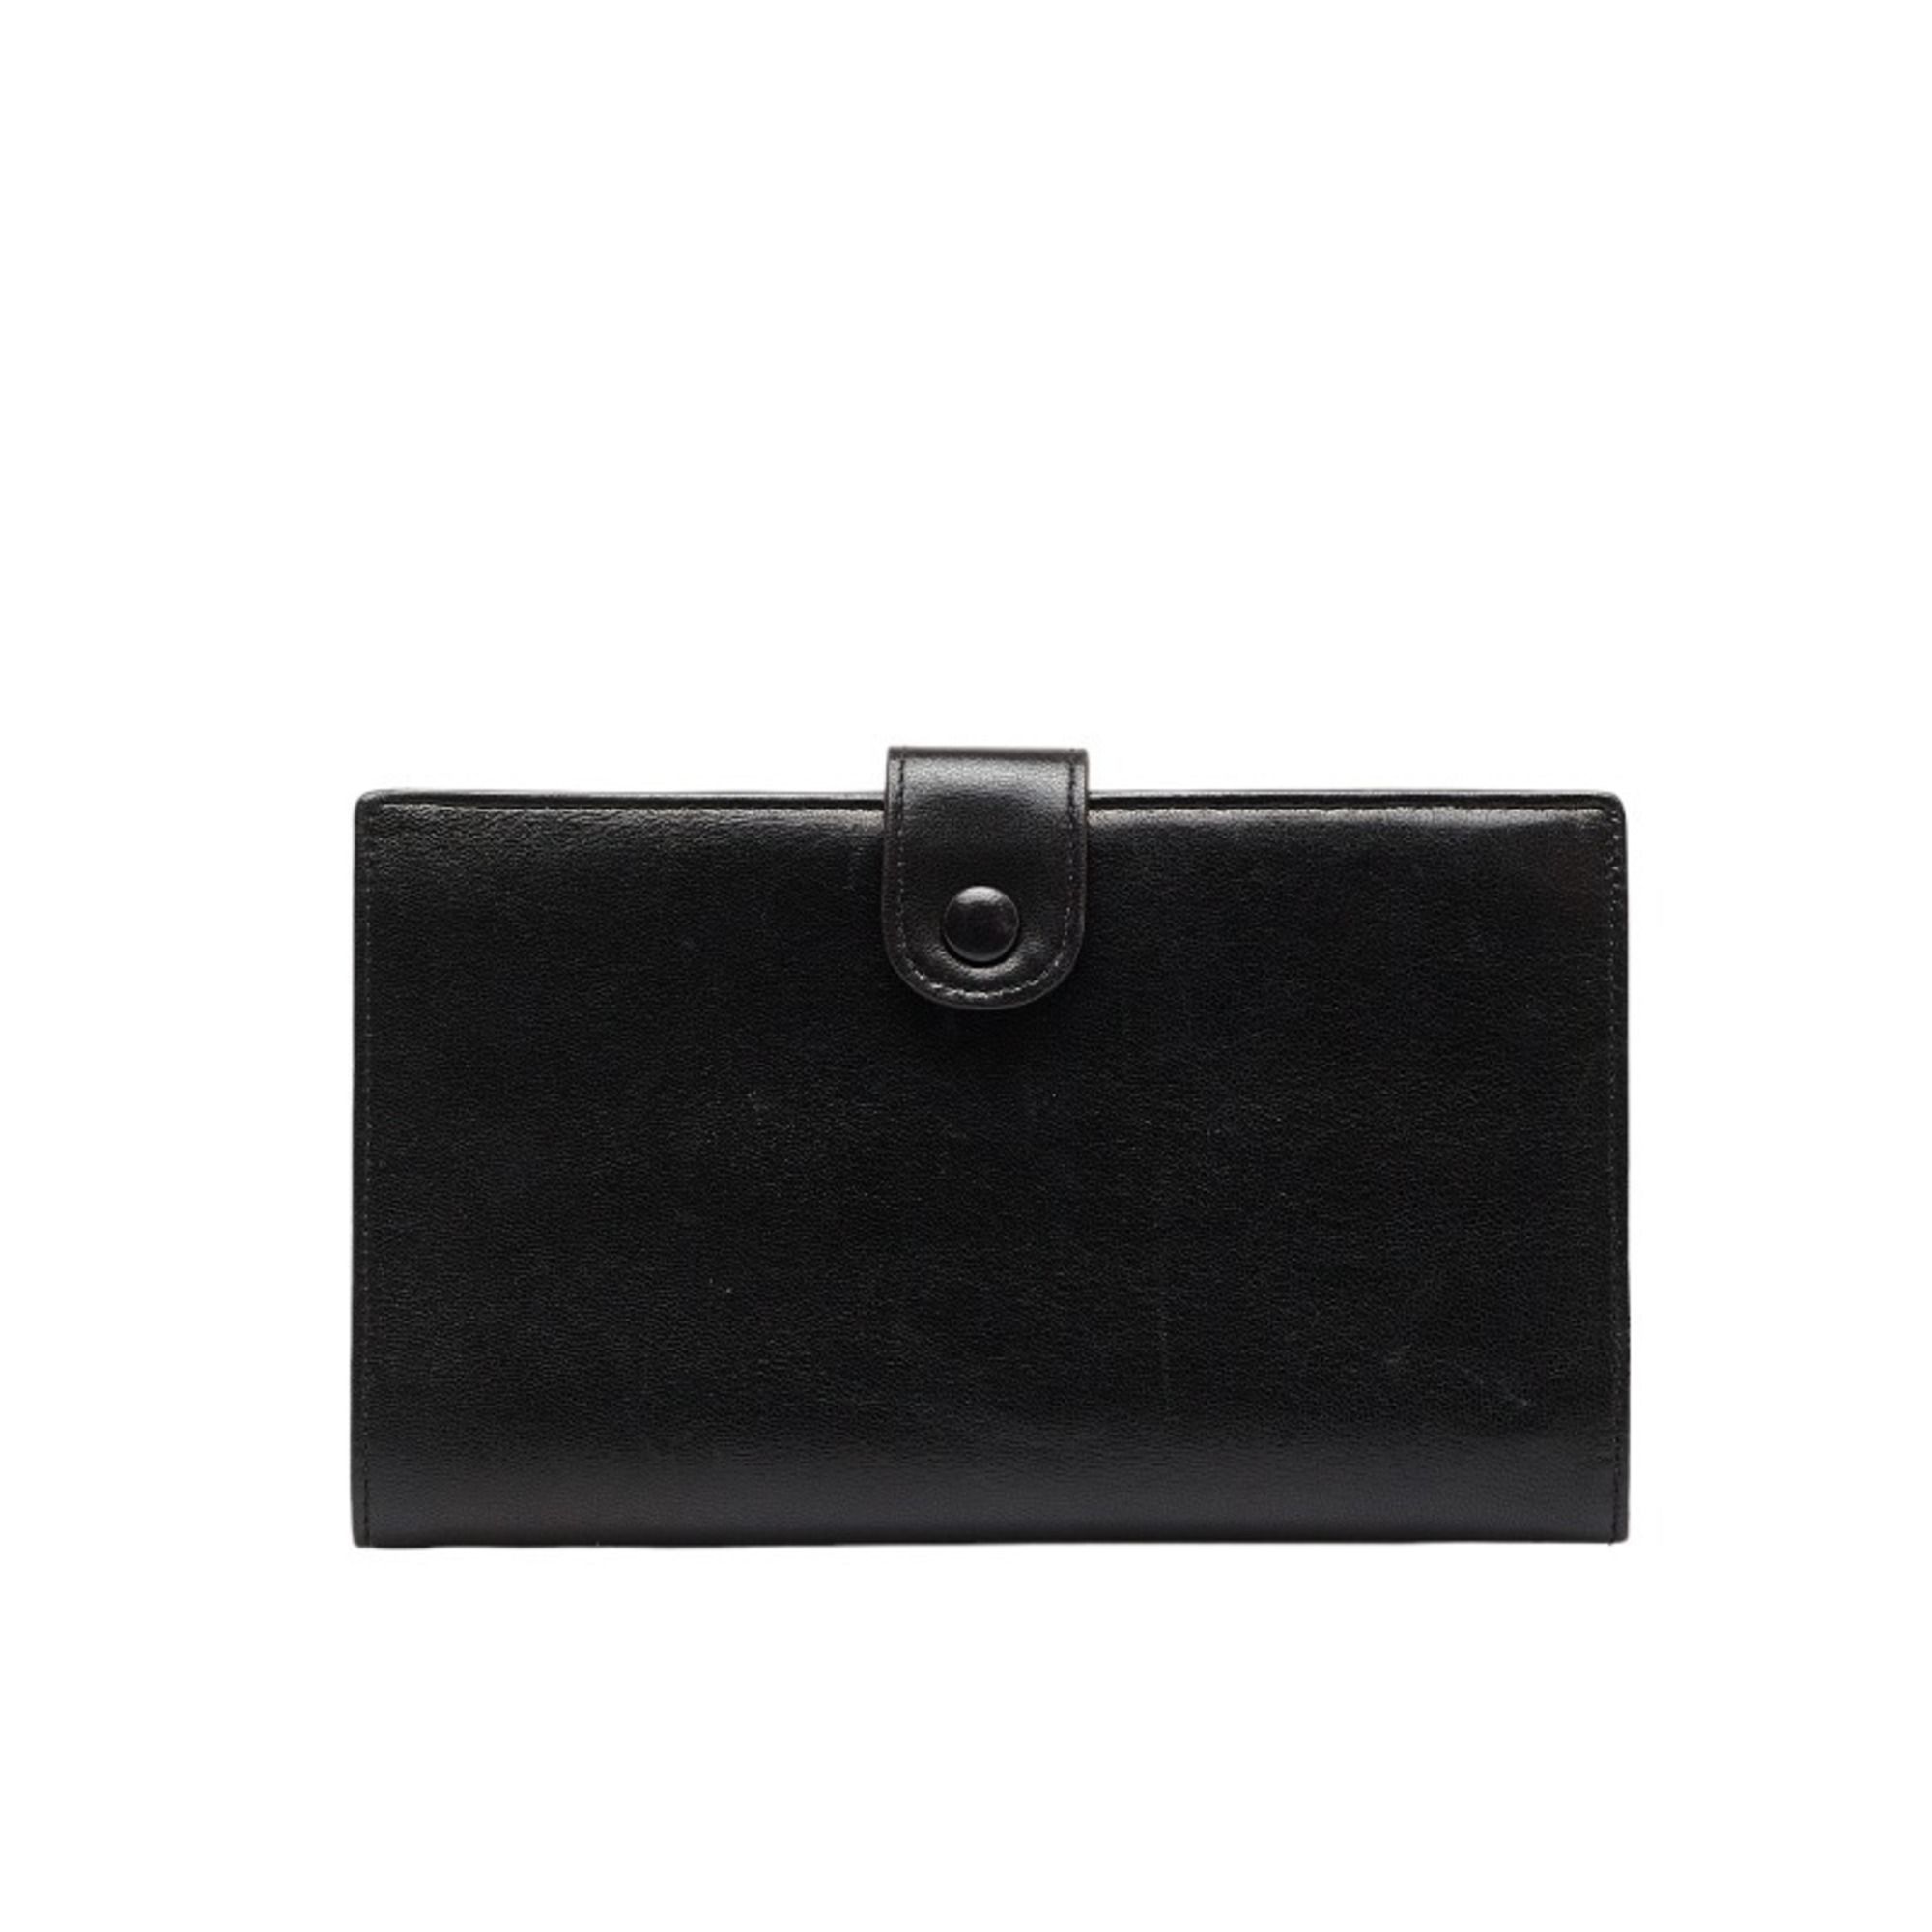 Chanel Chanel Coco Mark Leather Bifold Wallet